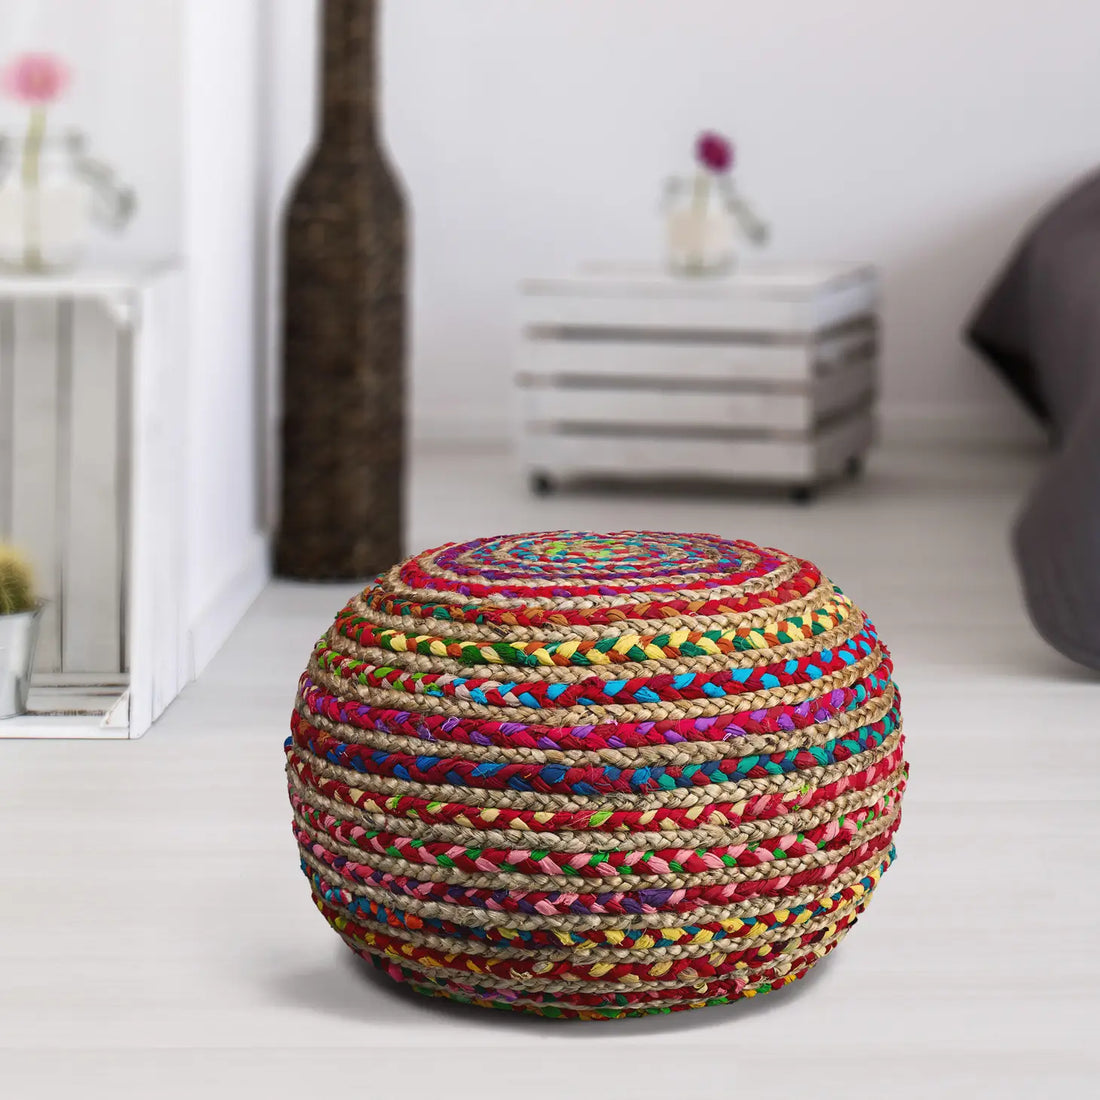 Recycled Natural Braided Pouf